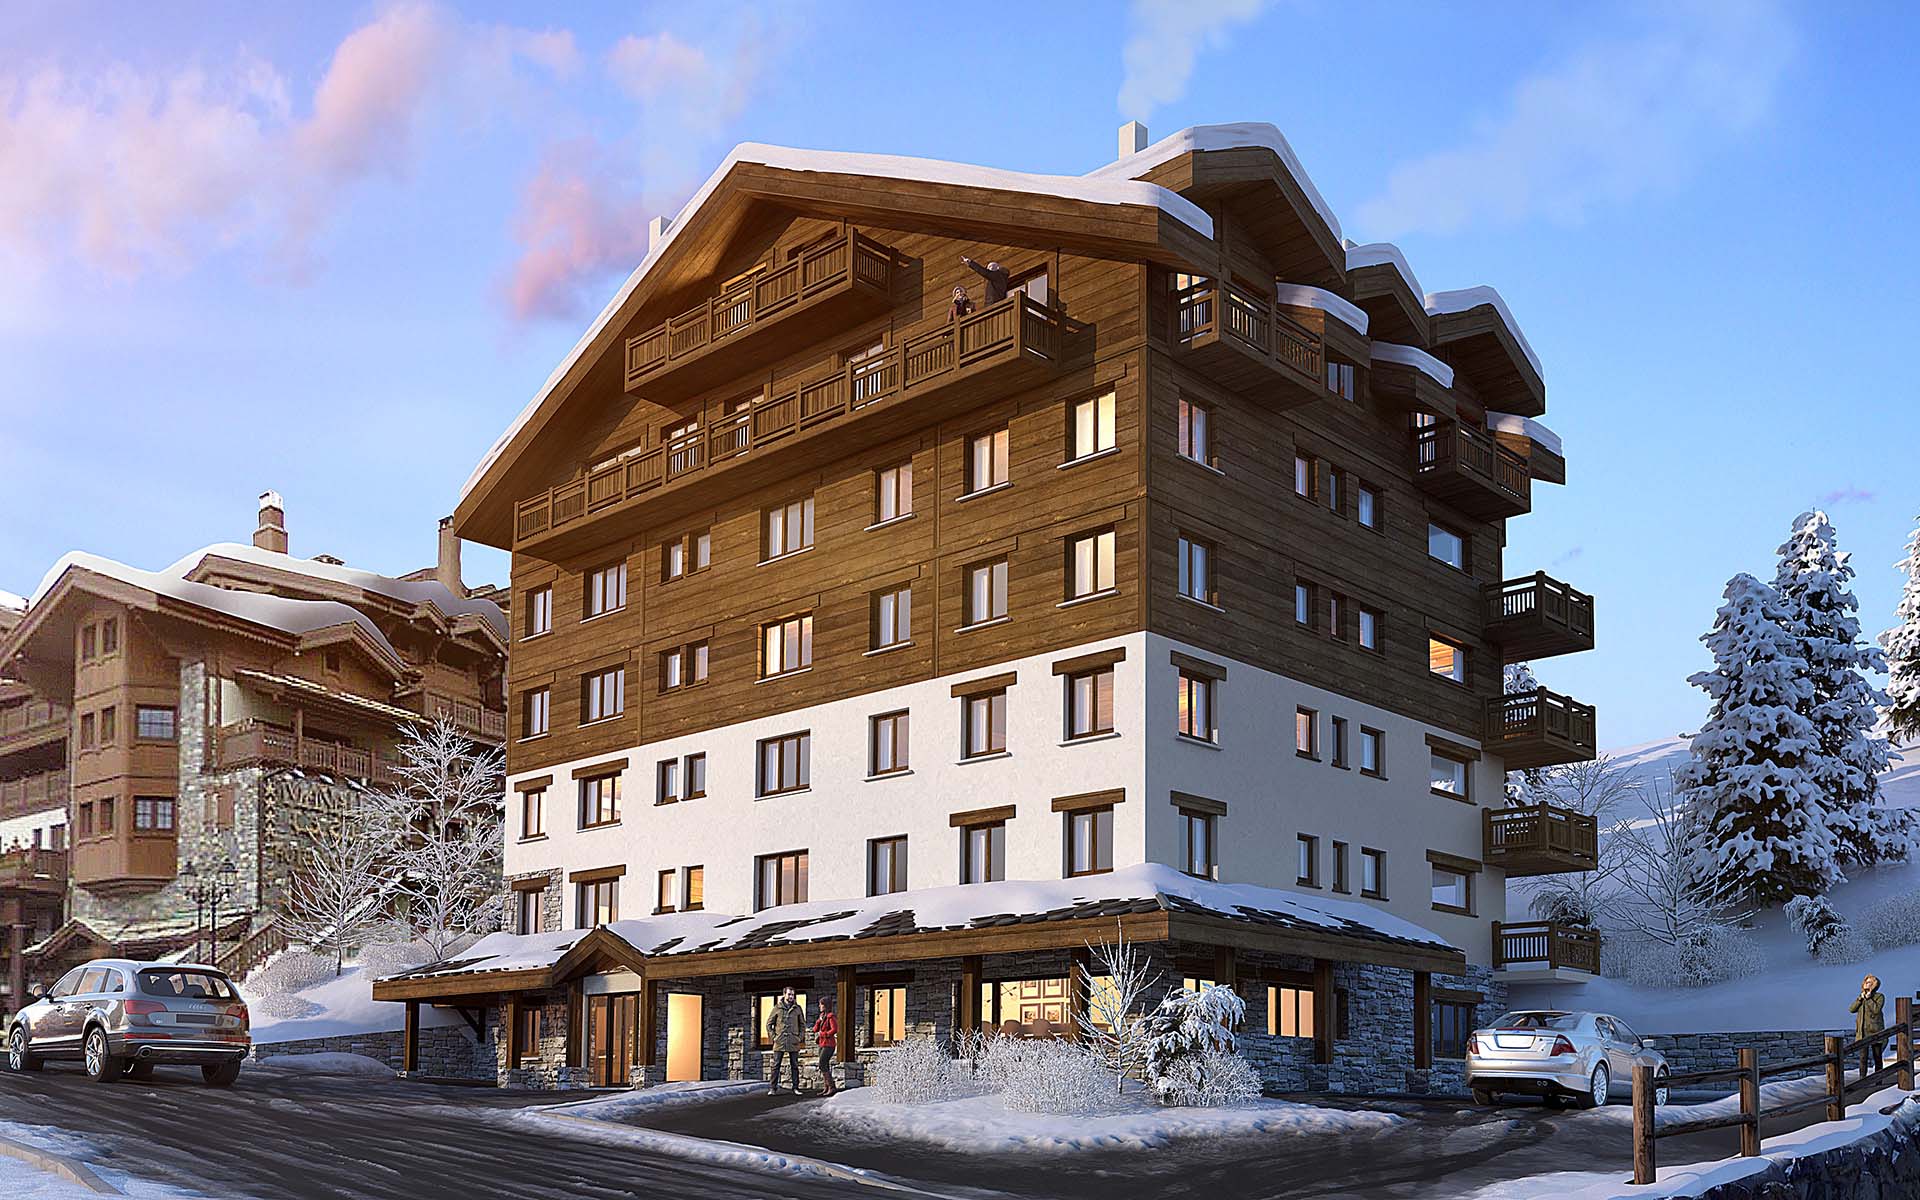 Creative agency producing a 3D perspective : 3D image of a luxurious chalet. 